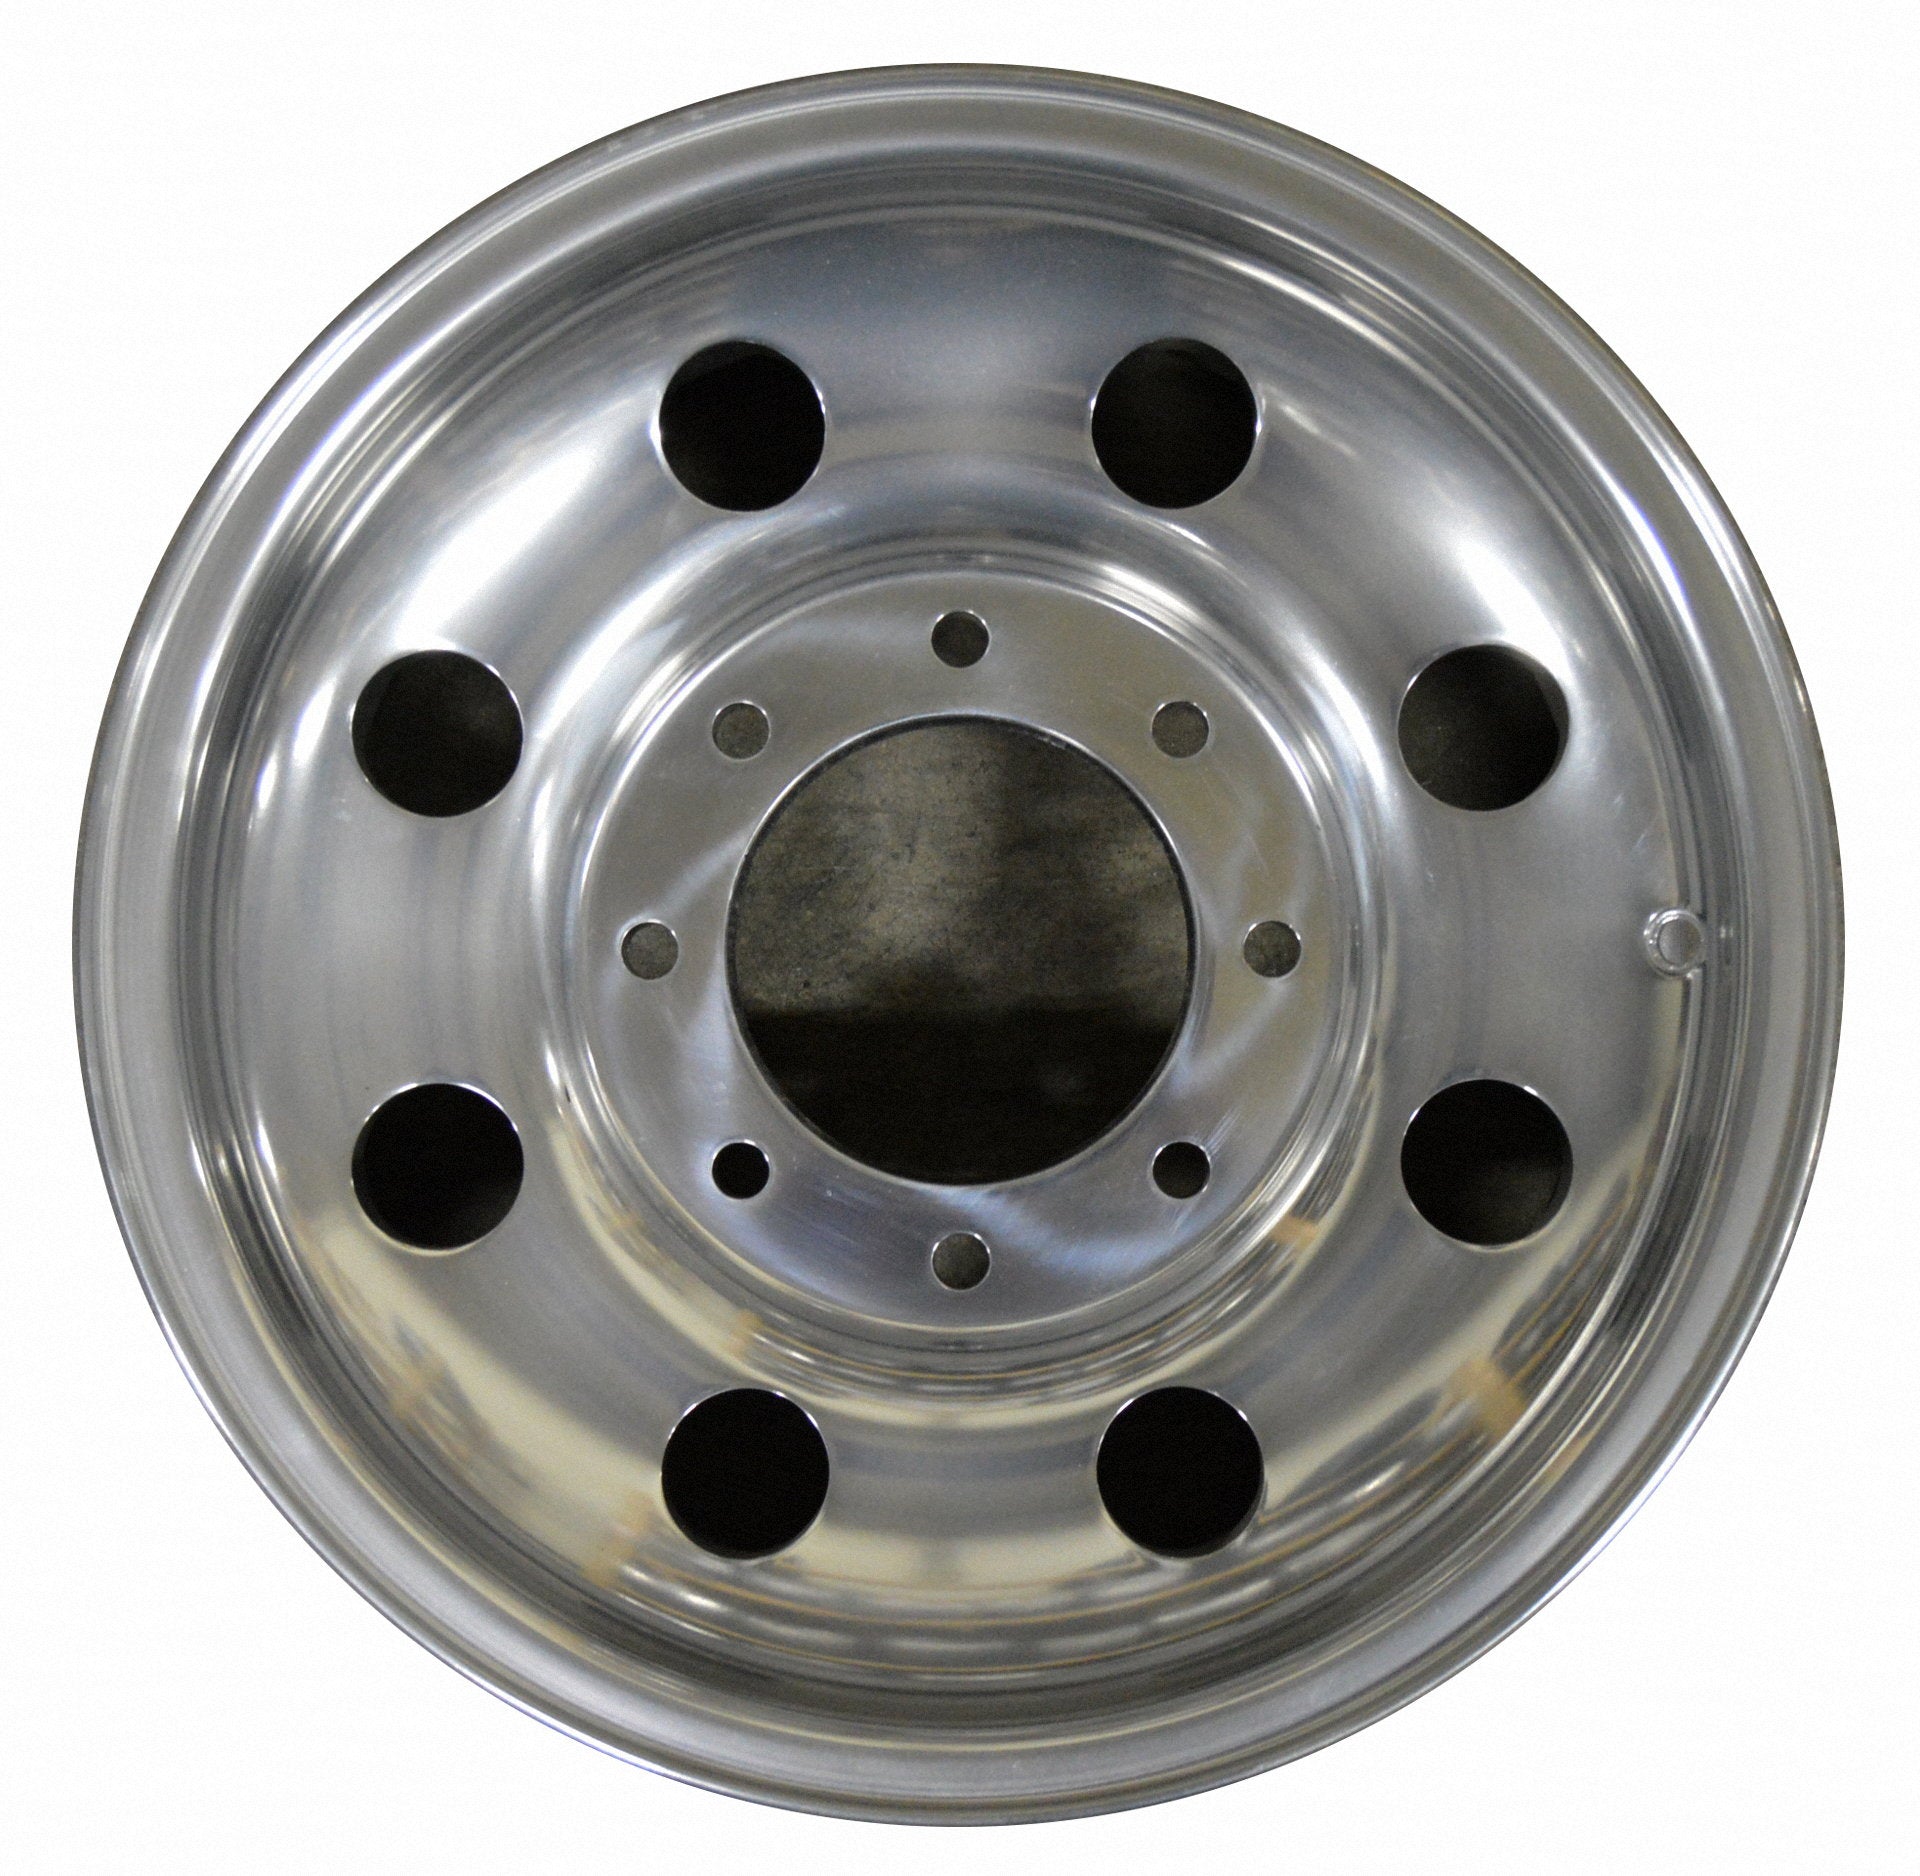 Ford Excursion  2000, 2001, 2002, 2003, 2004, 2005 Factory OEM Car Wheel Size 16x7 Alloy WAO.3338.FULL.POL